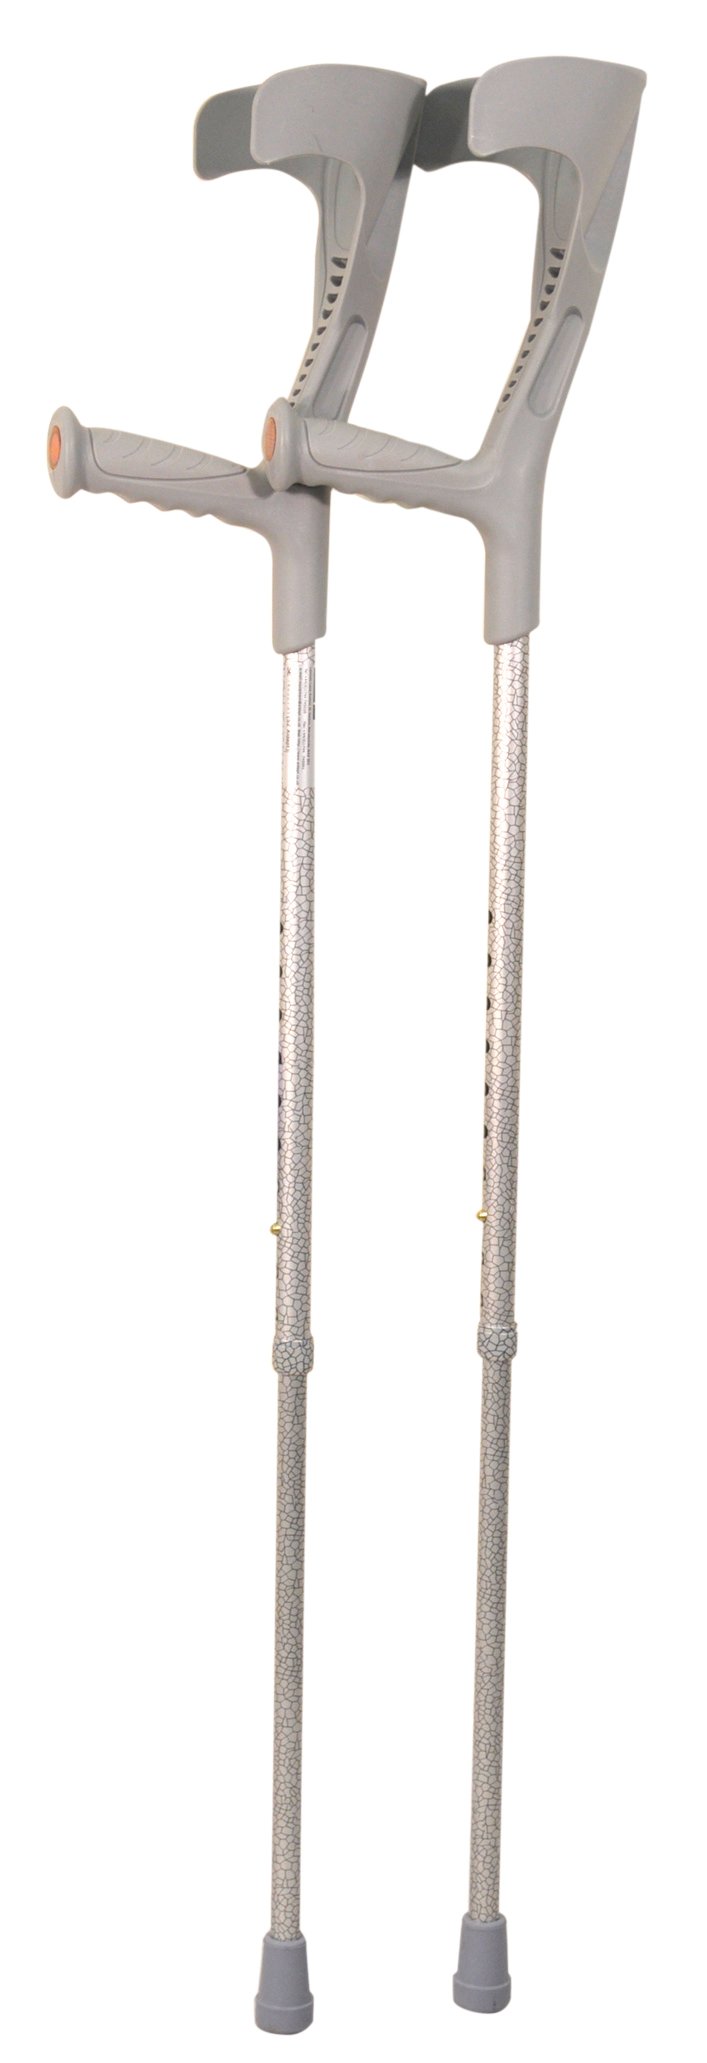 Deluxe Patterned Forearm Crutches (Pair) Grey Multi-Pattern